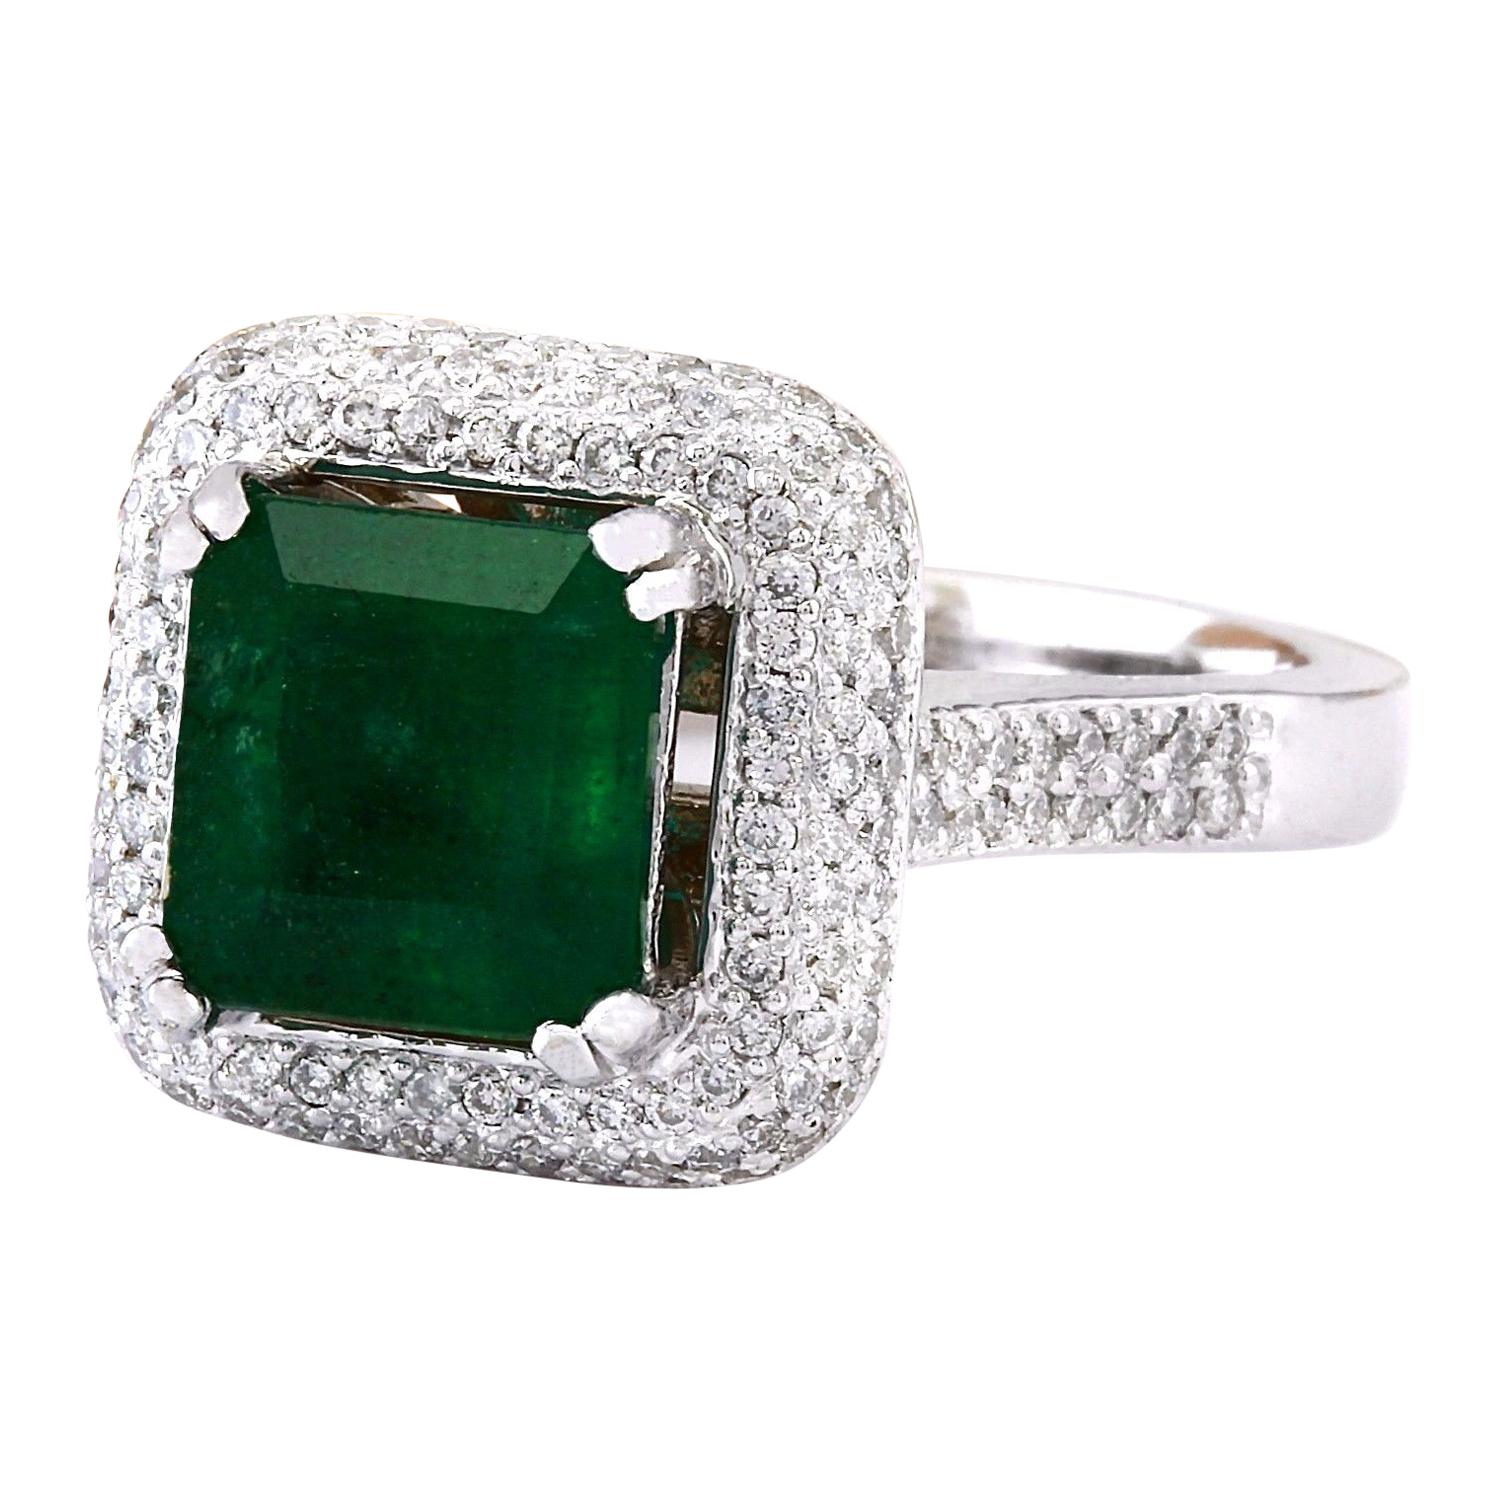 4.33 Carat Natural Emerald 14K Solid White Gold Diamond Ring
 Item Type: Ring
 Item Style: Engagement
 Material: 14K White Gold
 Mainstone: Emerald
 Stone Color: Green
 Stone Weight: 3.08 Carat
 Stone Shape: Emerald
 Stone Quantity: 1
 Stone